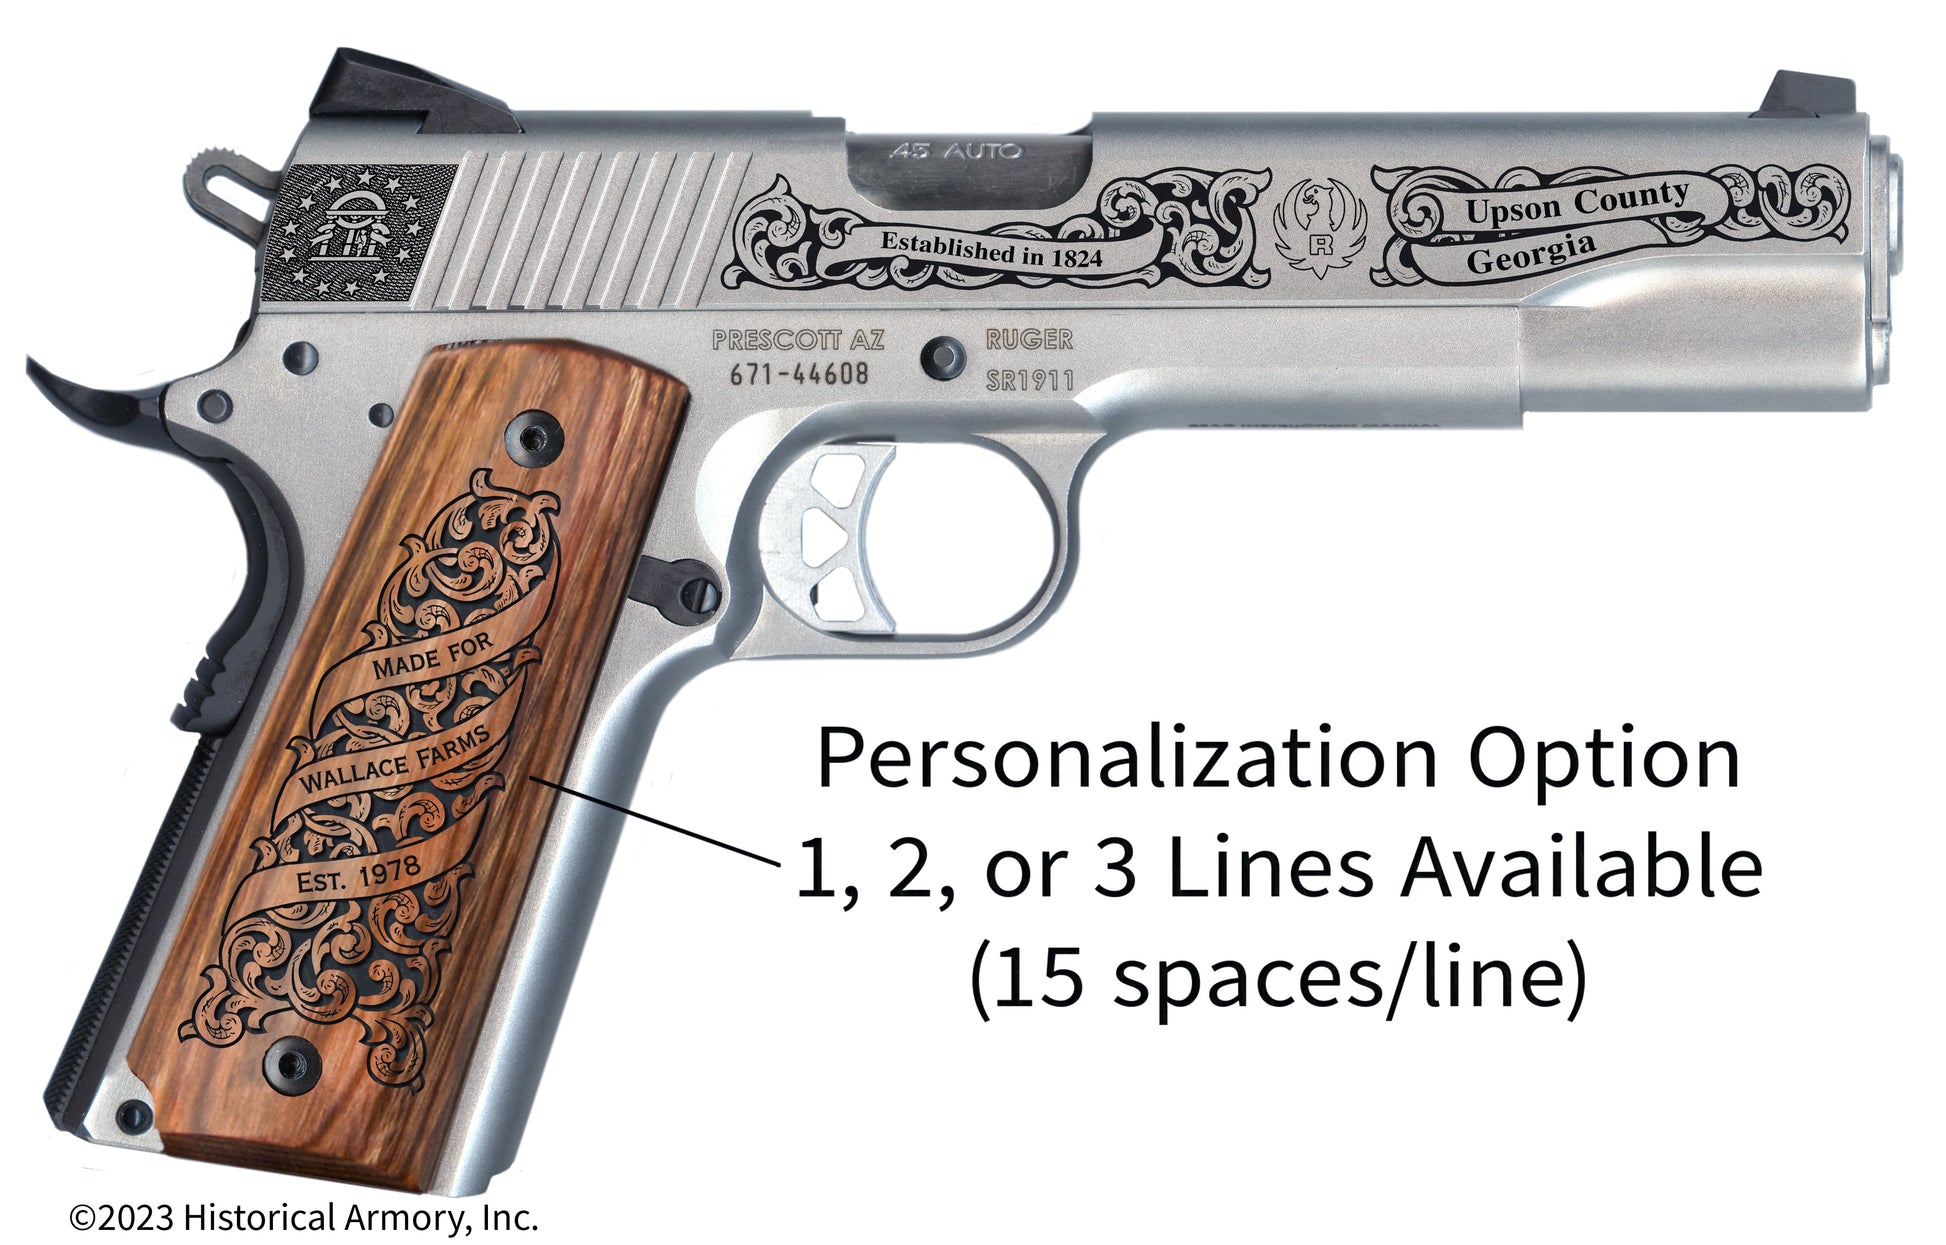 Upson County Georgia Personalized Engraved .45 Auto Ruger 1911